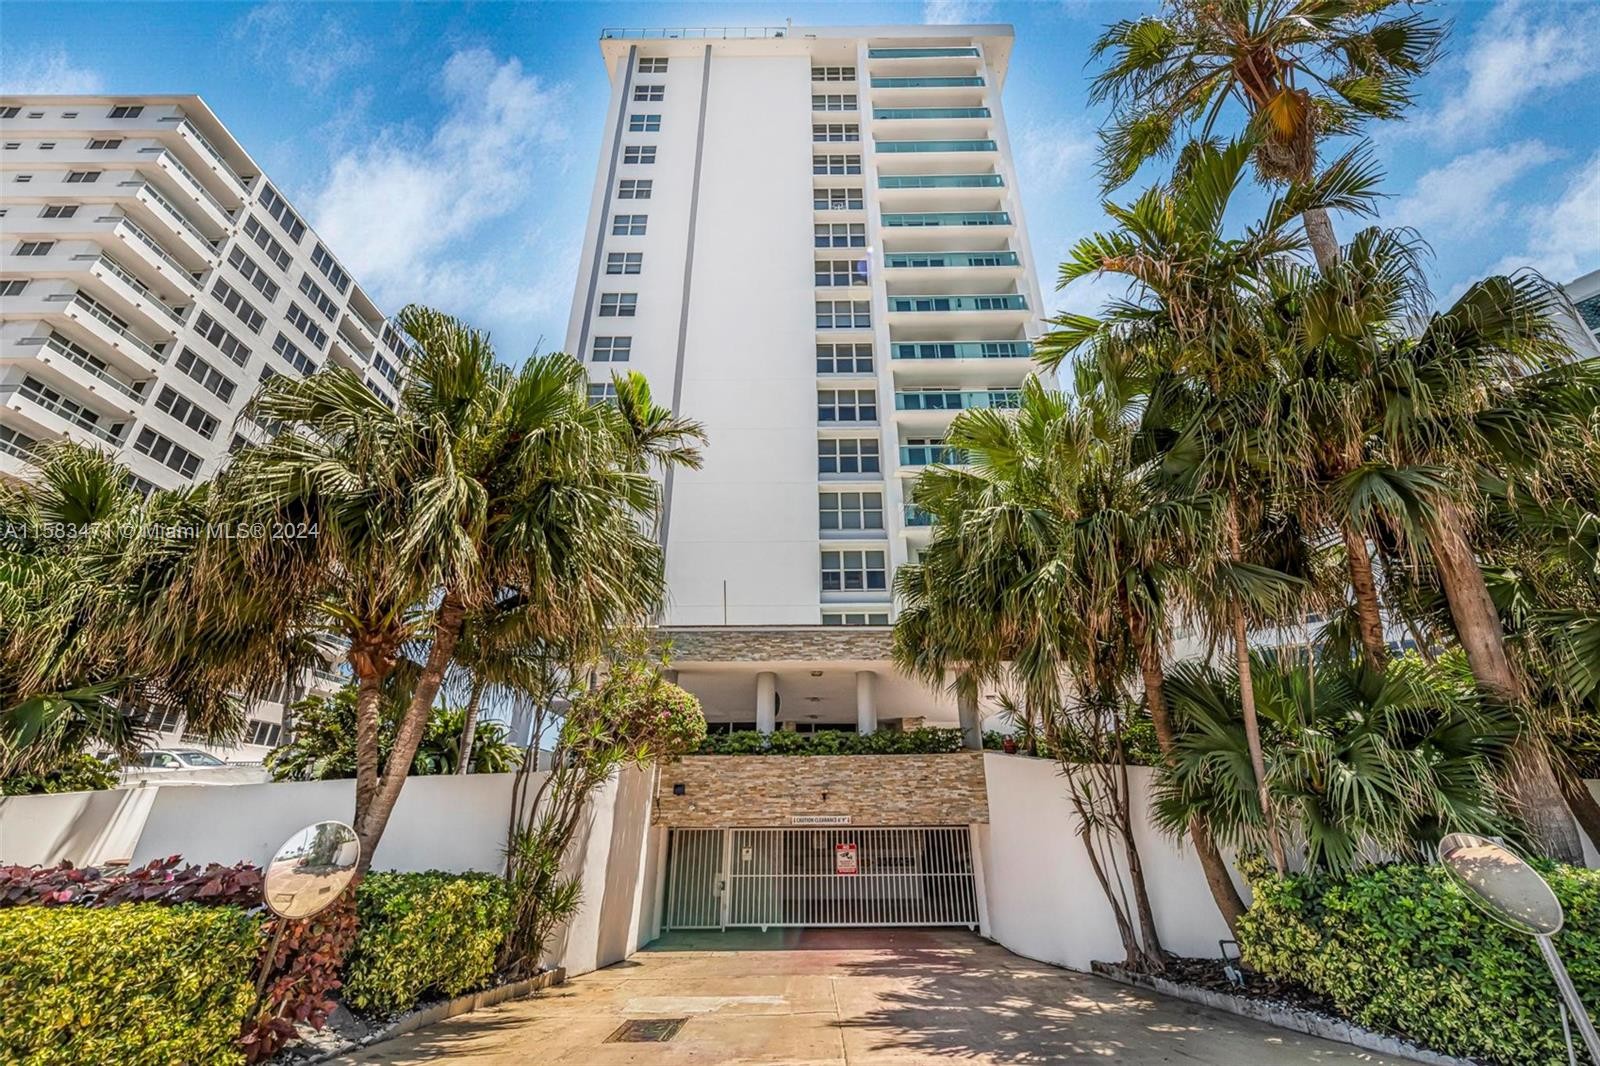 31. 5001 Collins Ave